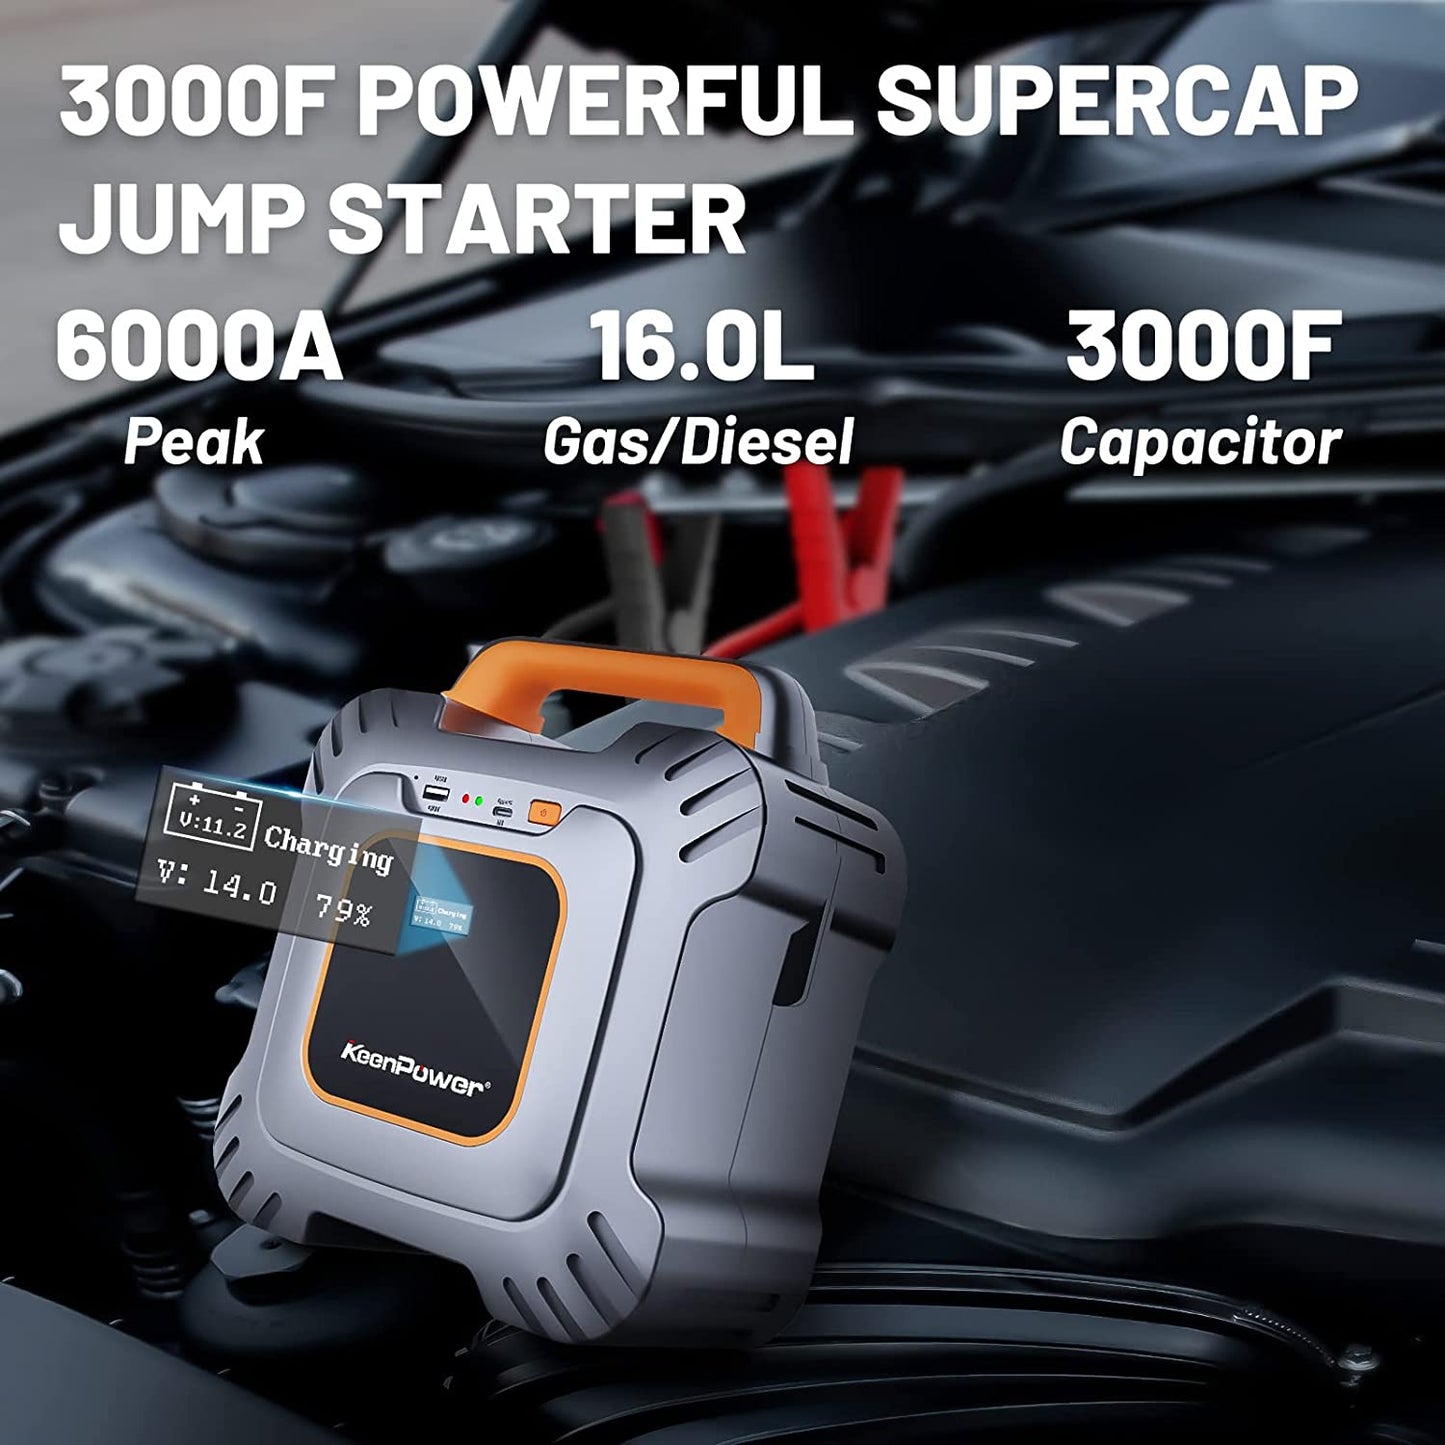 KeenPower SuperCap Portable Jump Starter 6000A Peak, Extremely Safe Super Capacitor Car Jump Starter Gasoline and Diesel Engines Up to 16-Liters